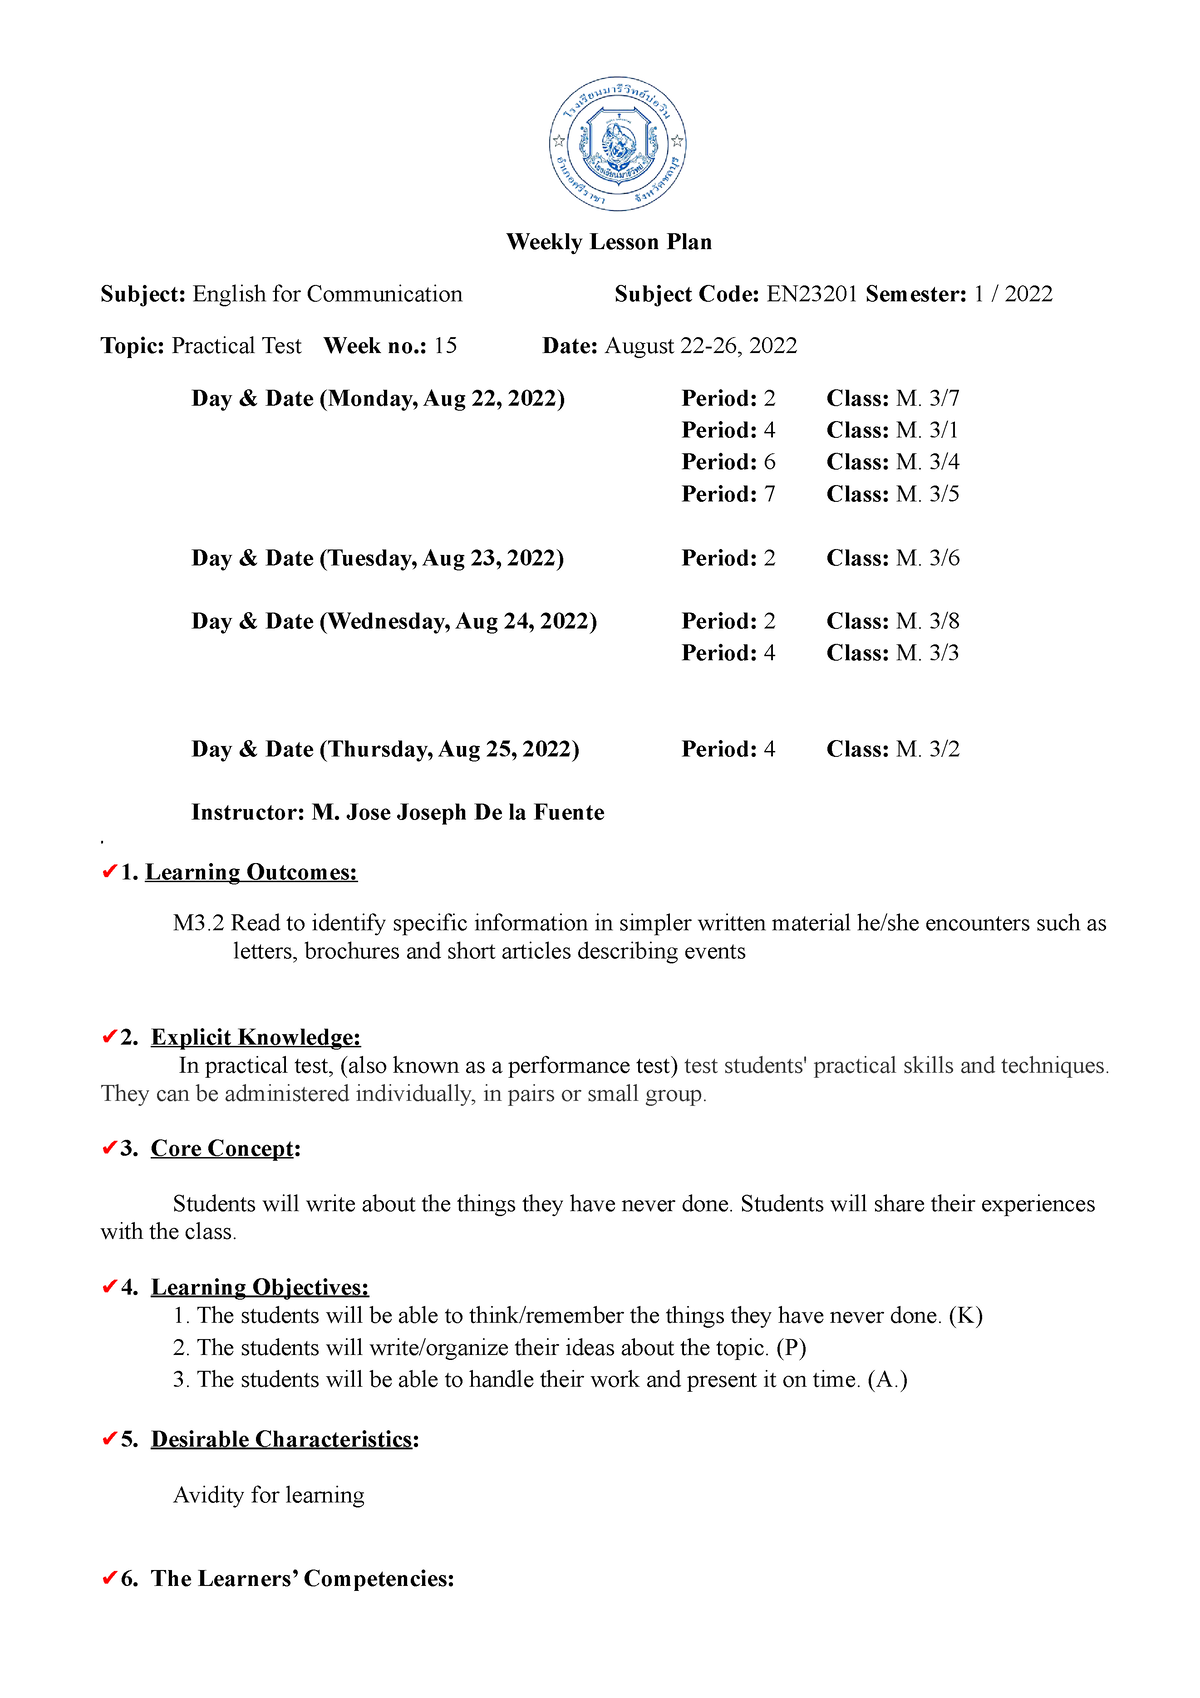 DAY 1 WEEK 15 M3 LESSON PLAN ESL Weekly Lesson Plan Subject 